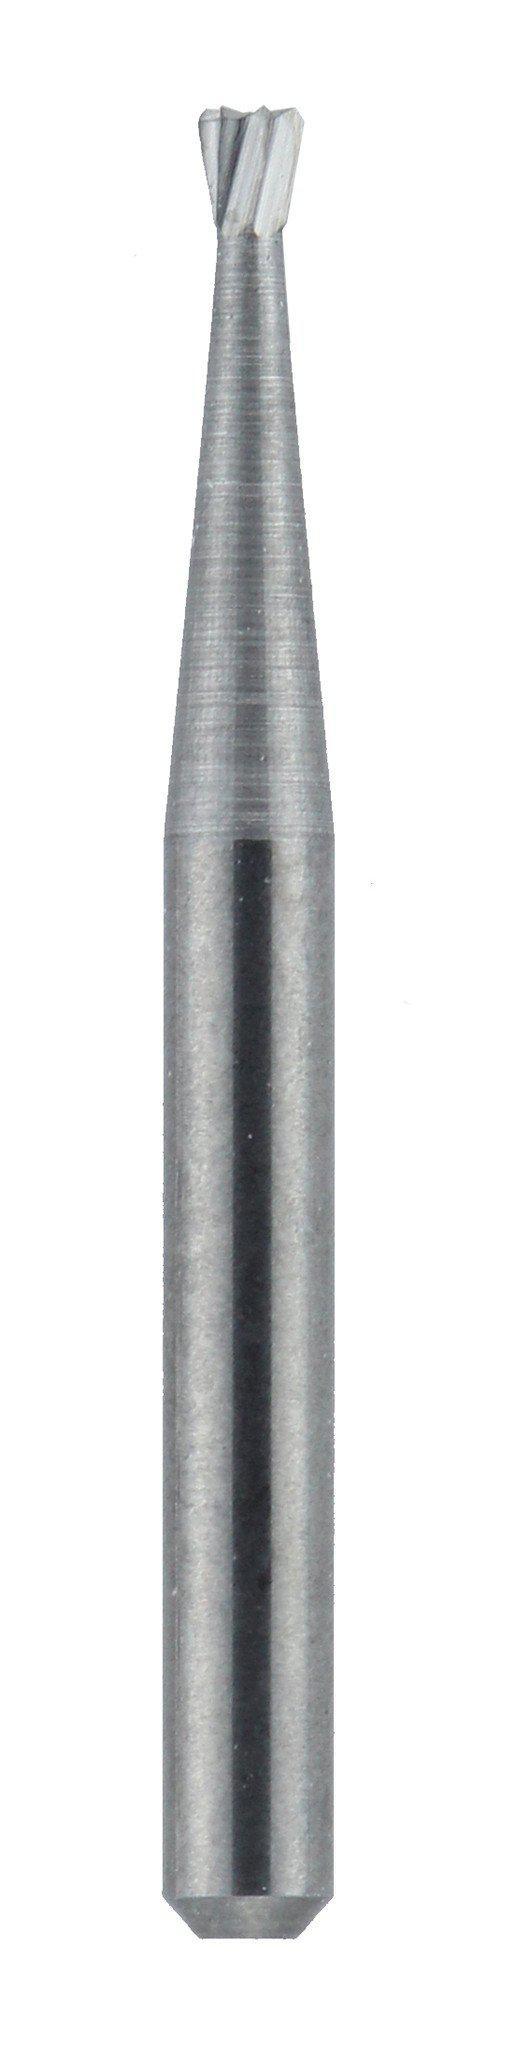 FGSS35-1 (Short Shank) Dentalree Solid Carbide 1-Piece. Made in USA